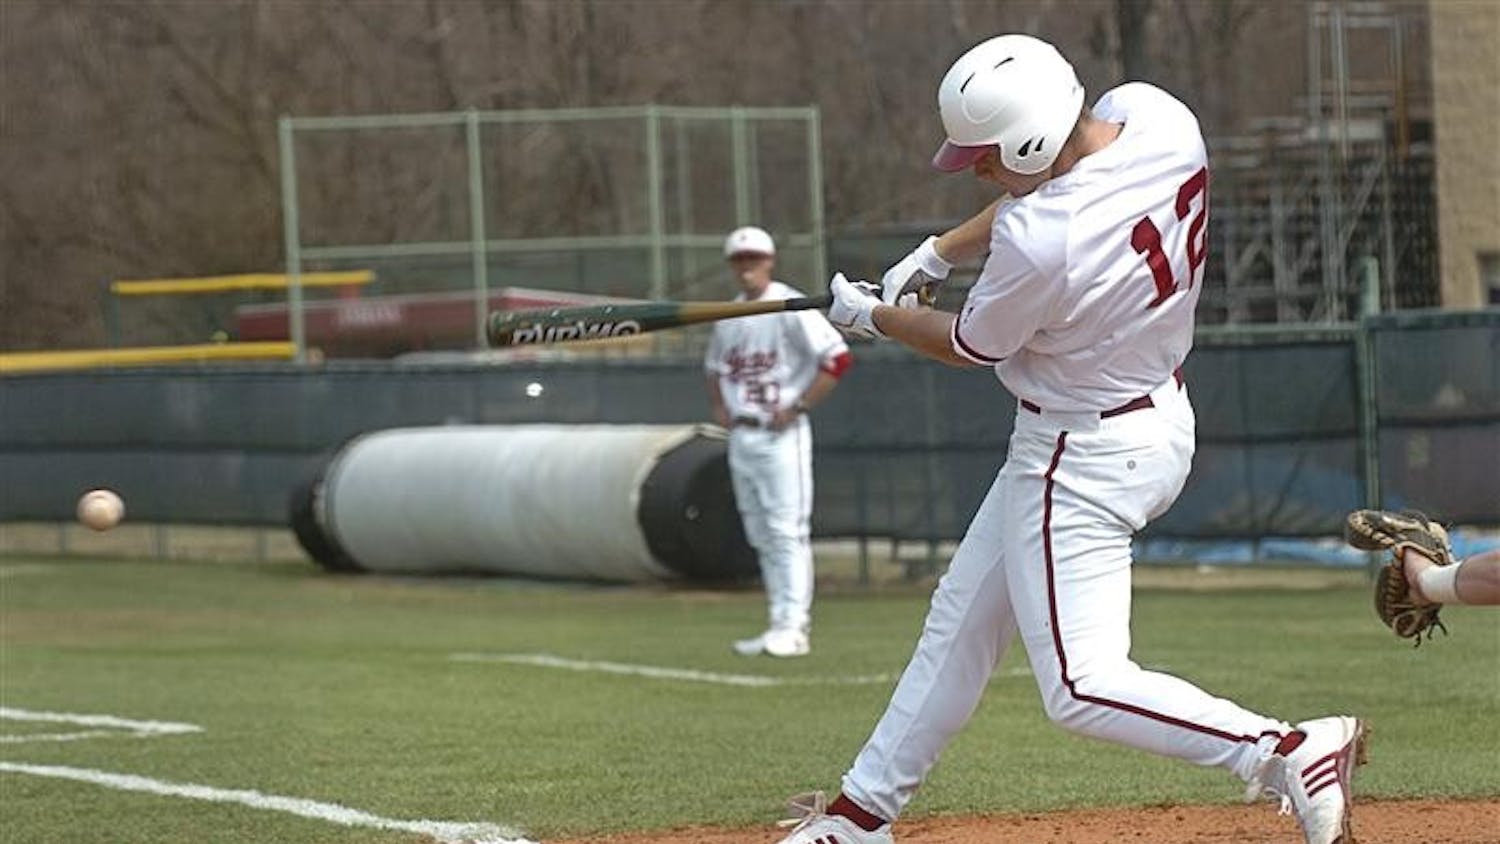 Freshman outfielder Alex Dickerson swings against Morehead State Tuesday afternoon at the Sembower Field. Dickerson and the Hoosiers hit nine home runs, with 22 hits in an 18-3 win.